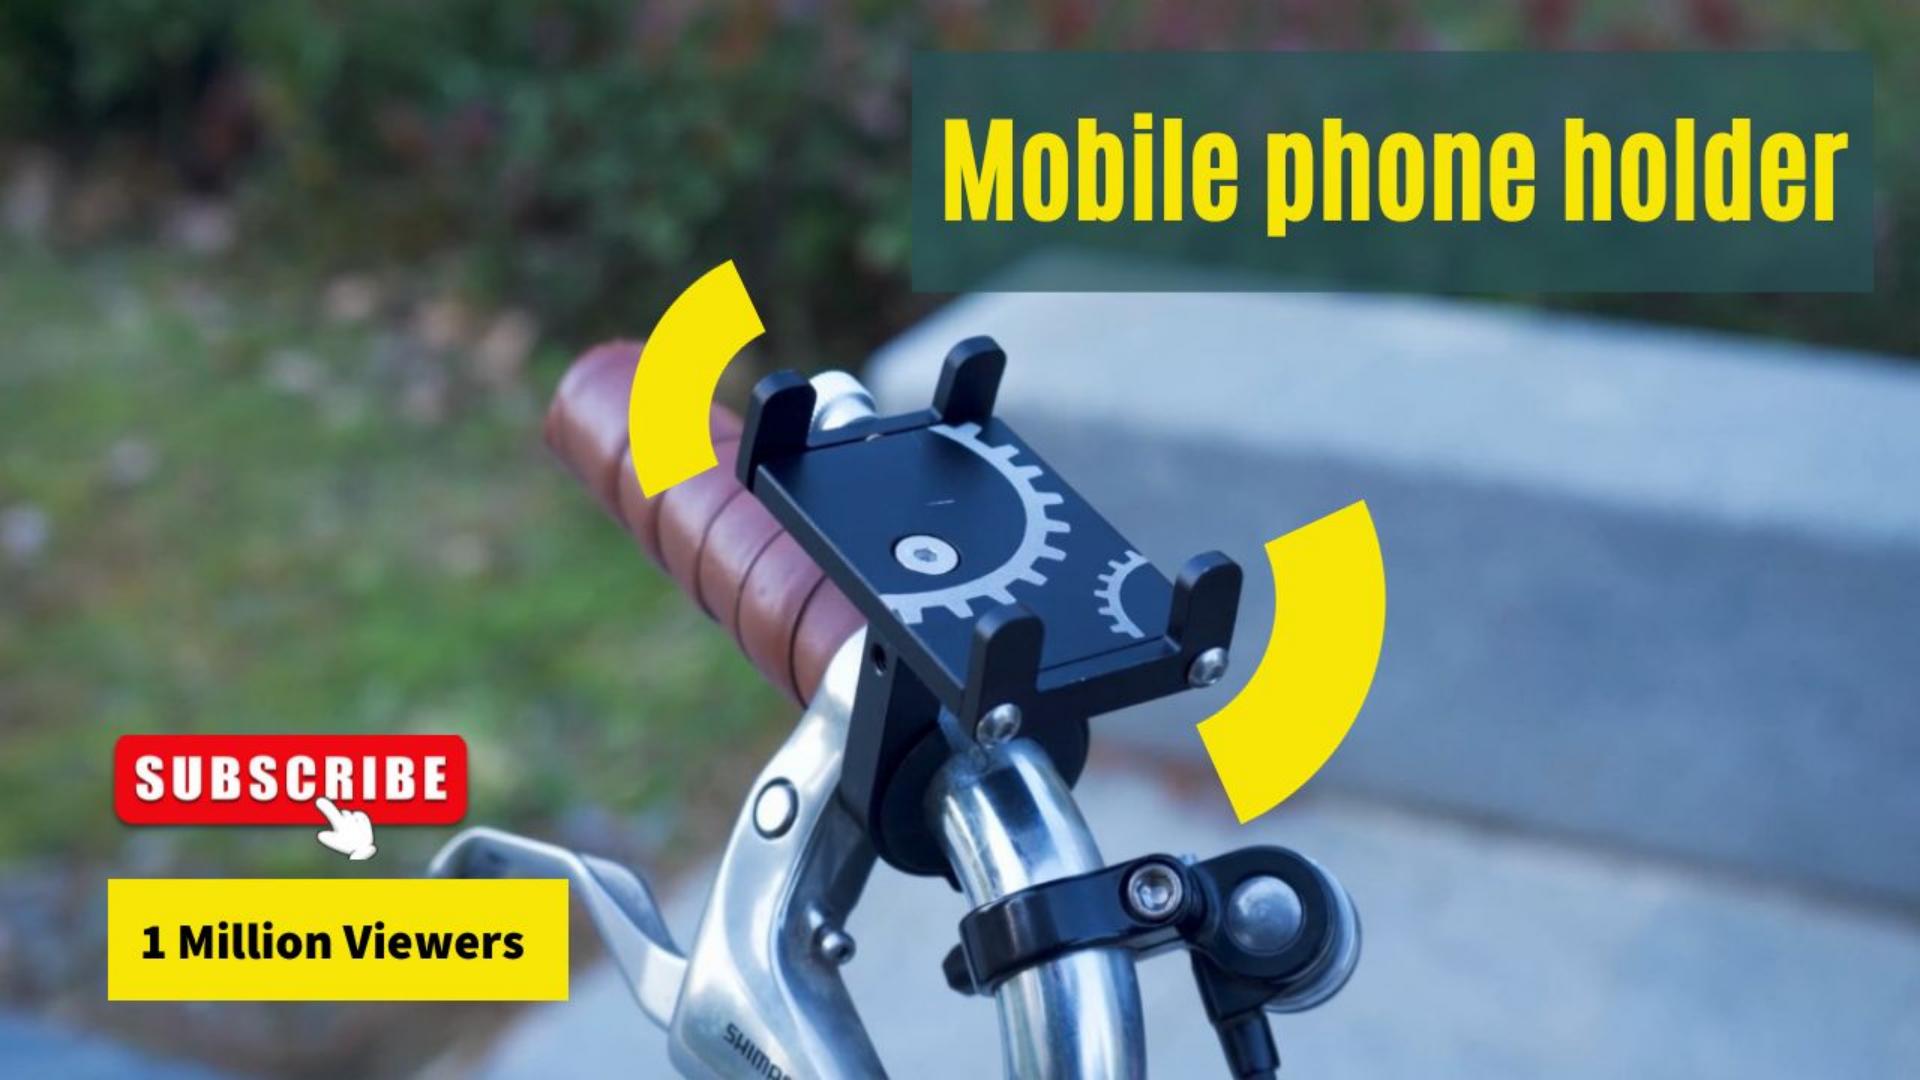 How to install a phone holder on your bike?